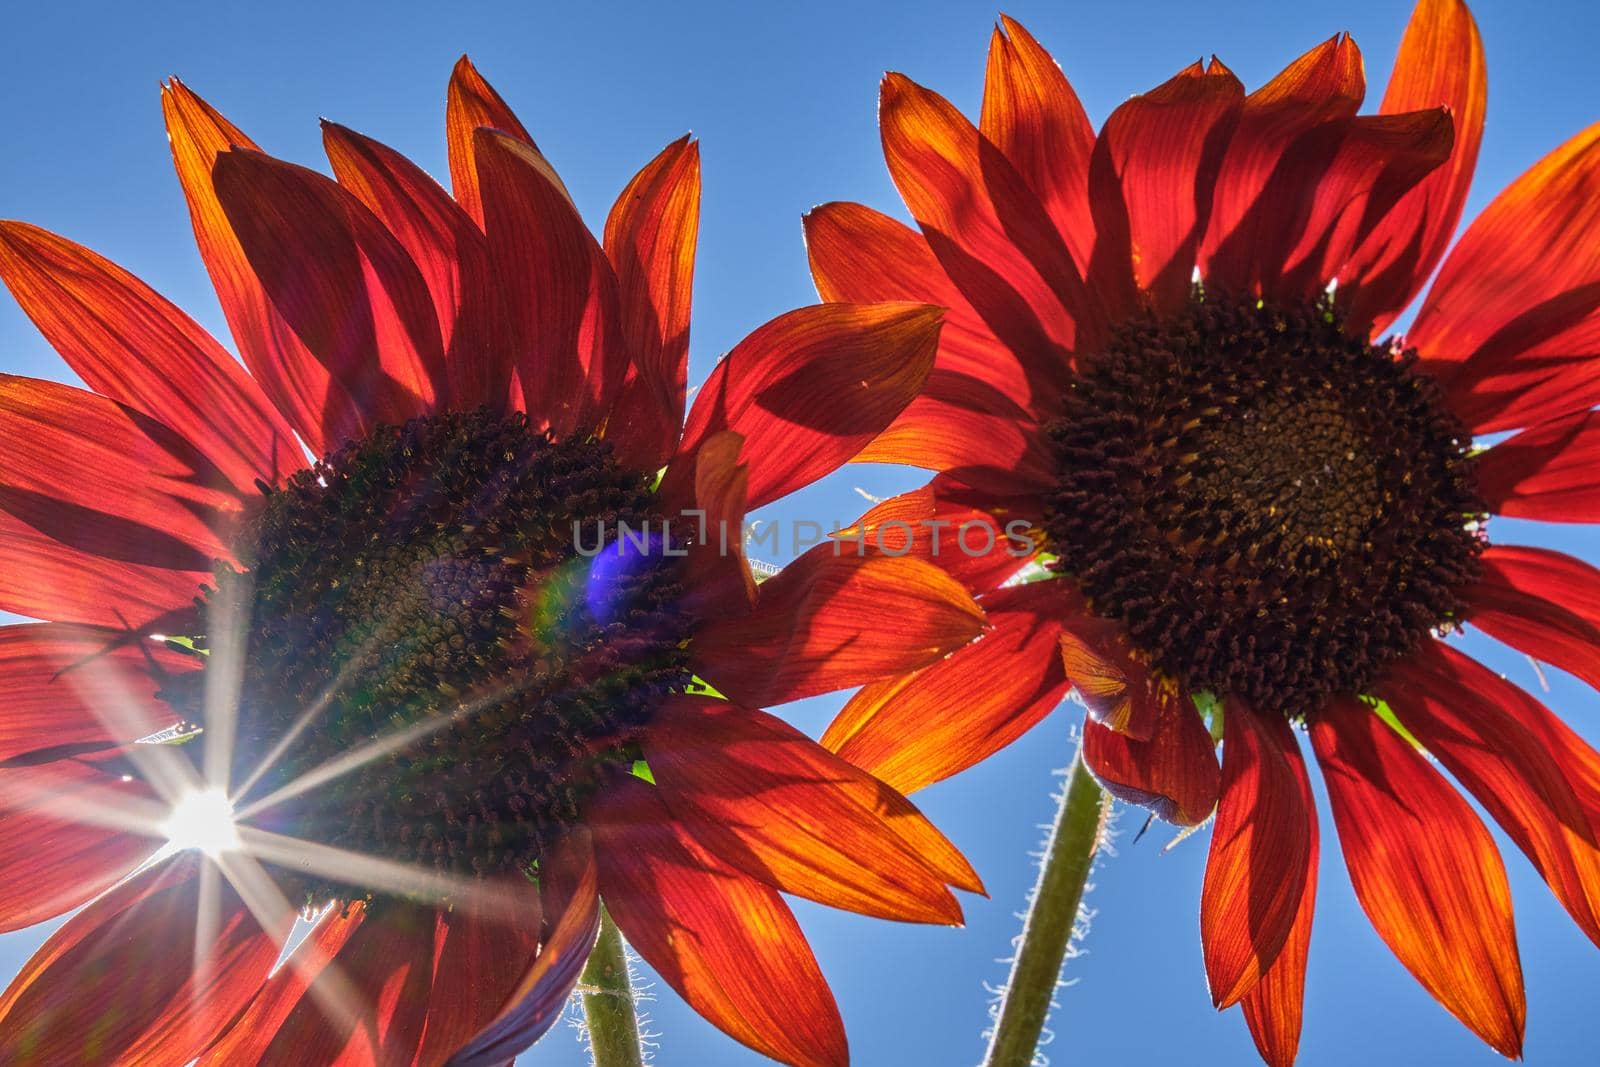 two red sunflowers with solar star on the left with blue sky background